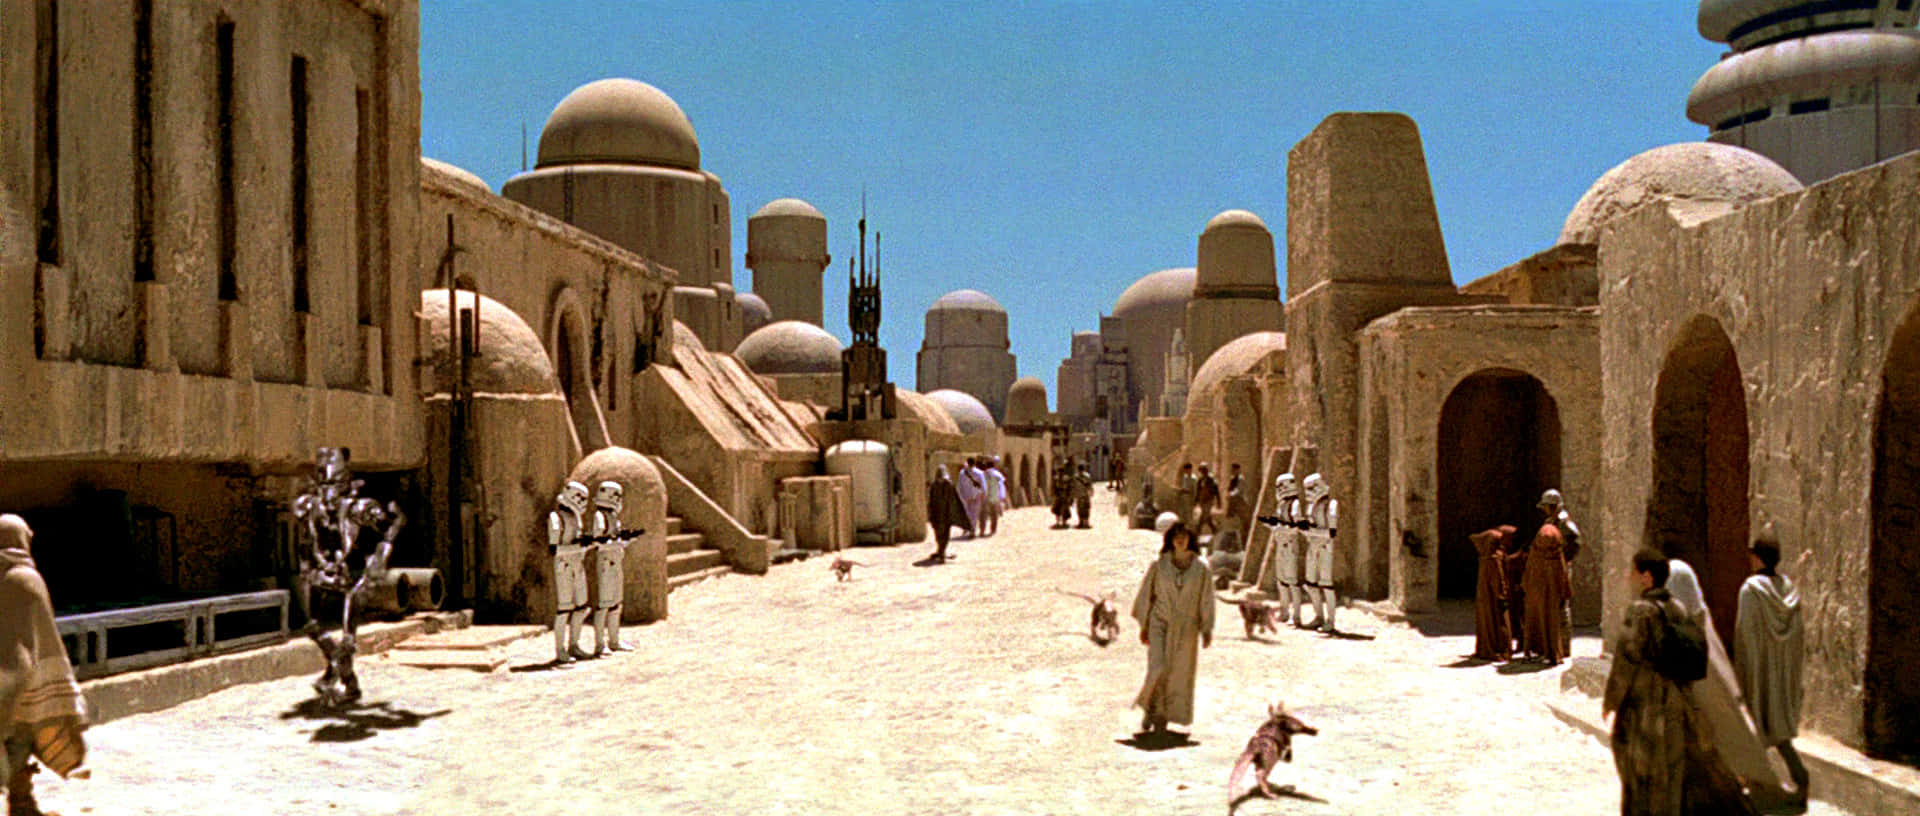 Step into the bustling spaceport of Mos Eisley Wallpaper